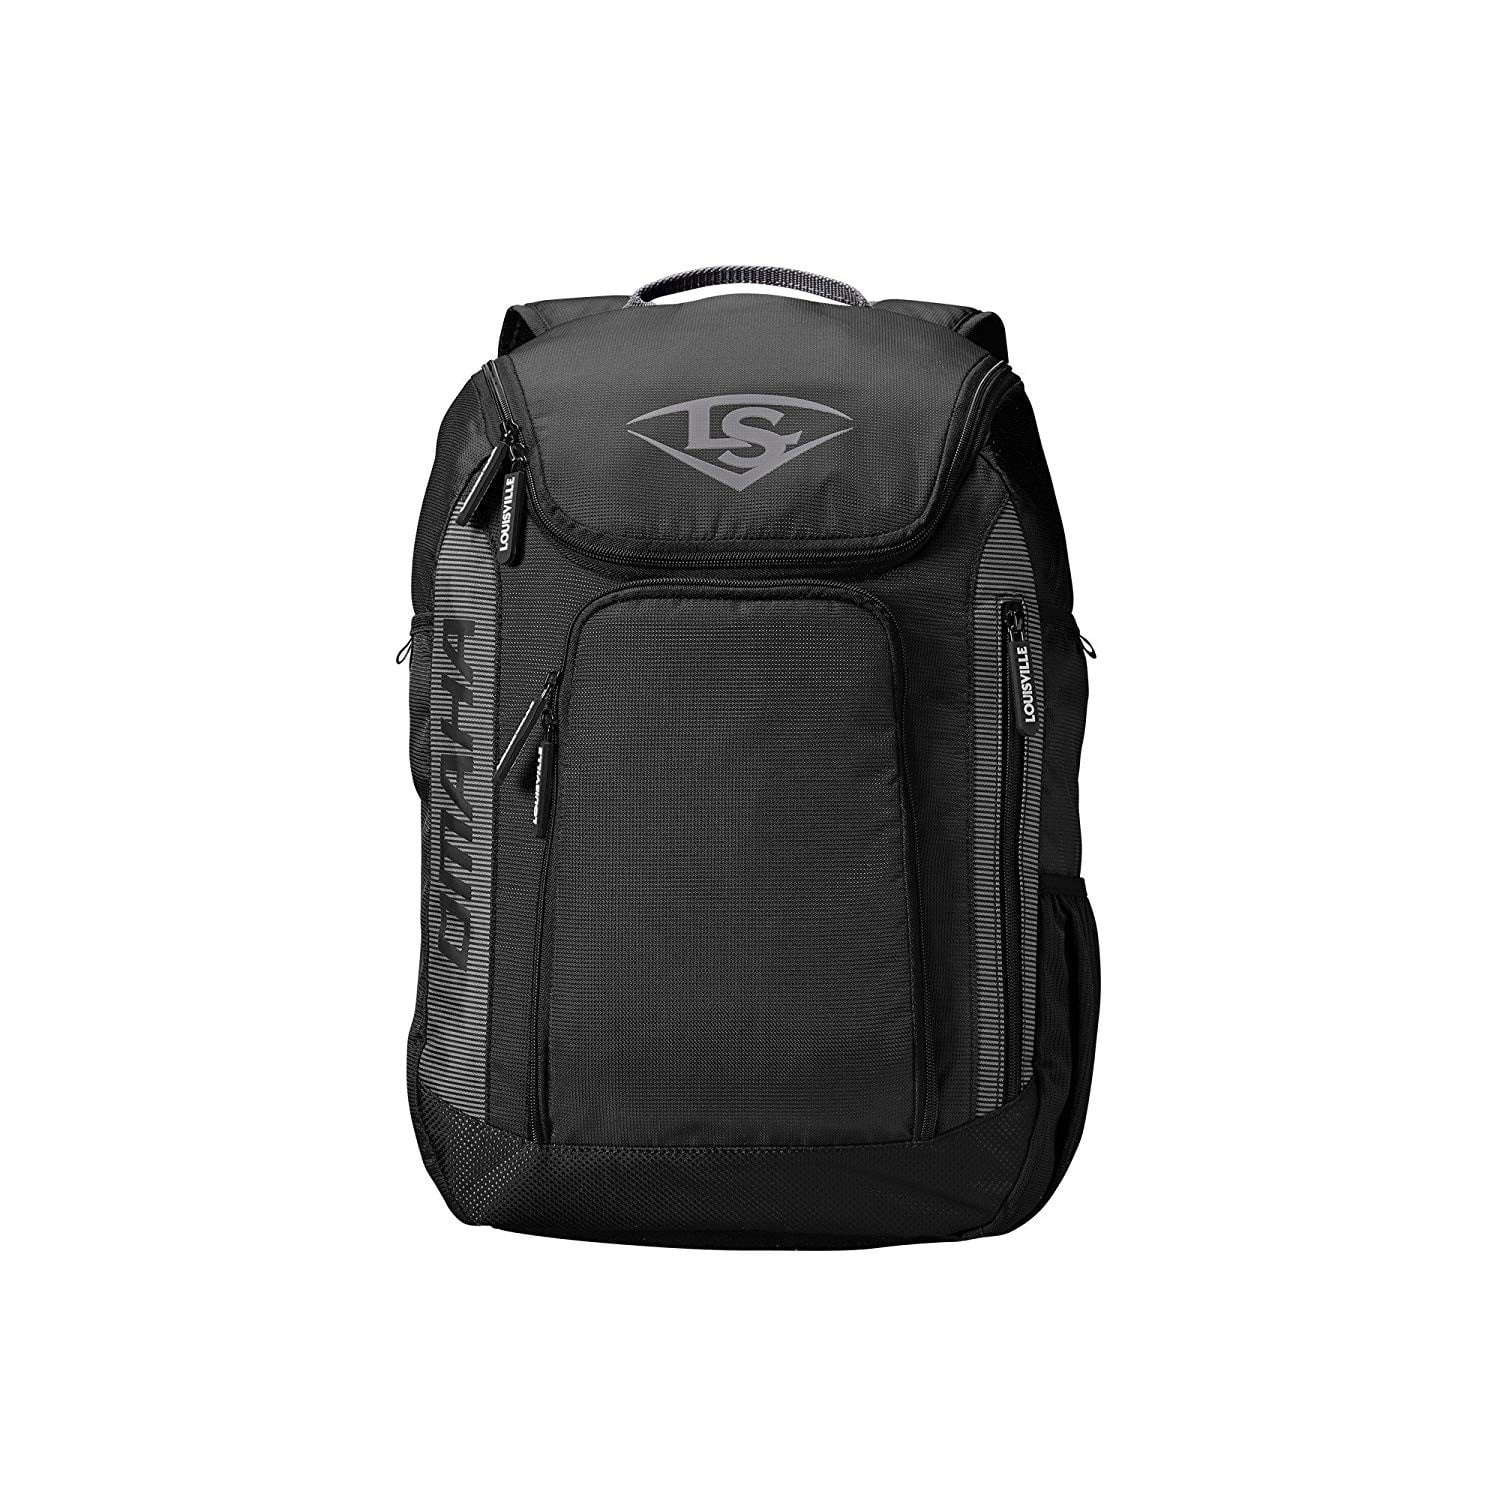 Louisville Omaha Stick Backpack Pack Navy, 65,00 €